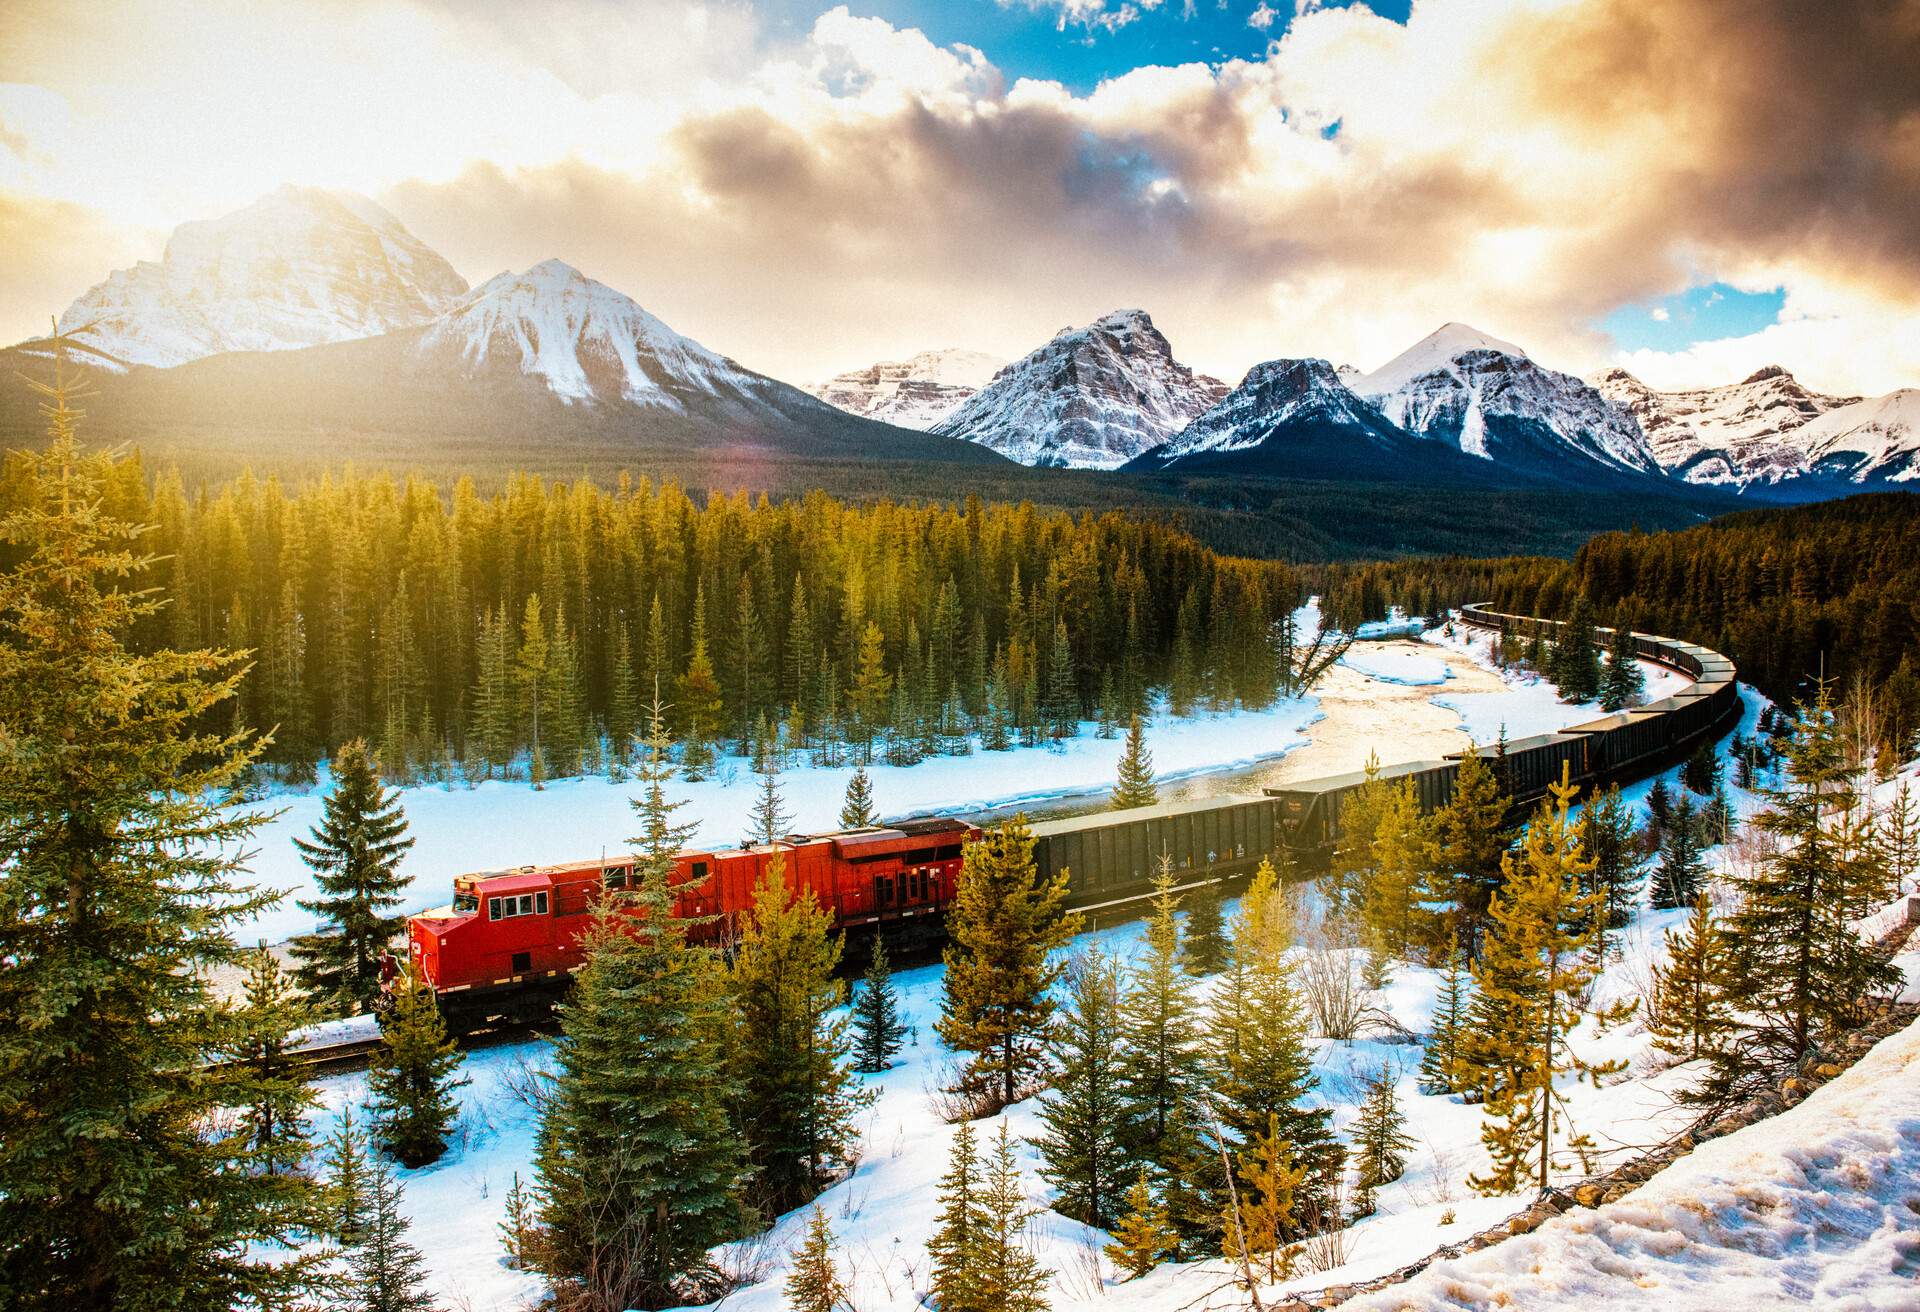 DEST_CANADA_BANFF-NATIONAL-PARK_CANADIAN-PACIFIC-RAILWAY-TRAIN_GettyImages-538813059